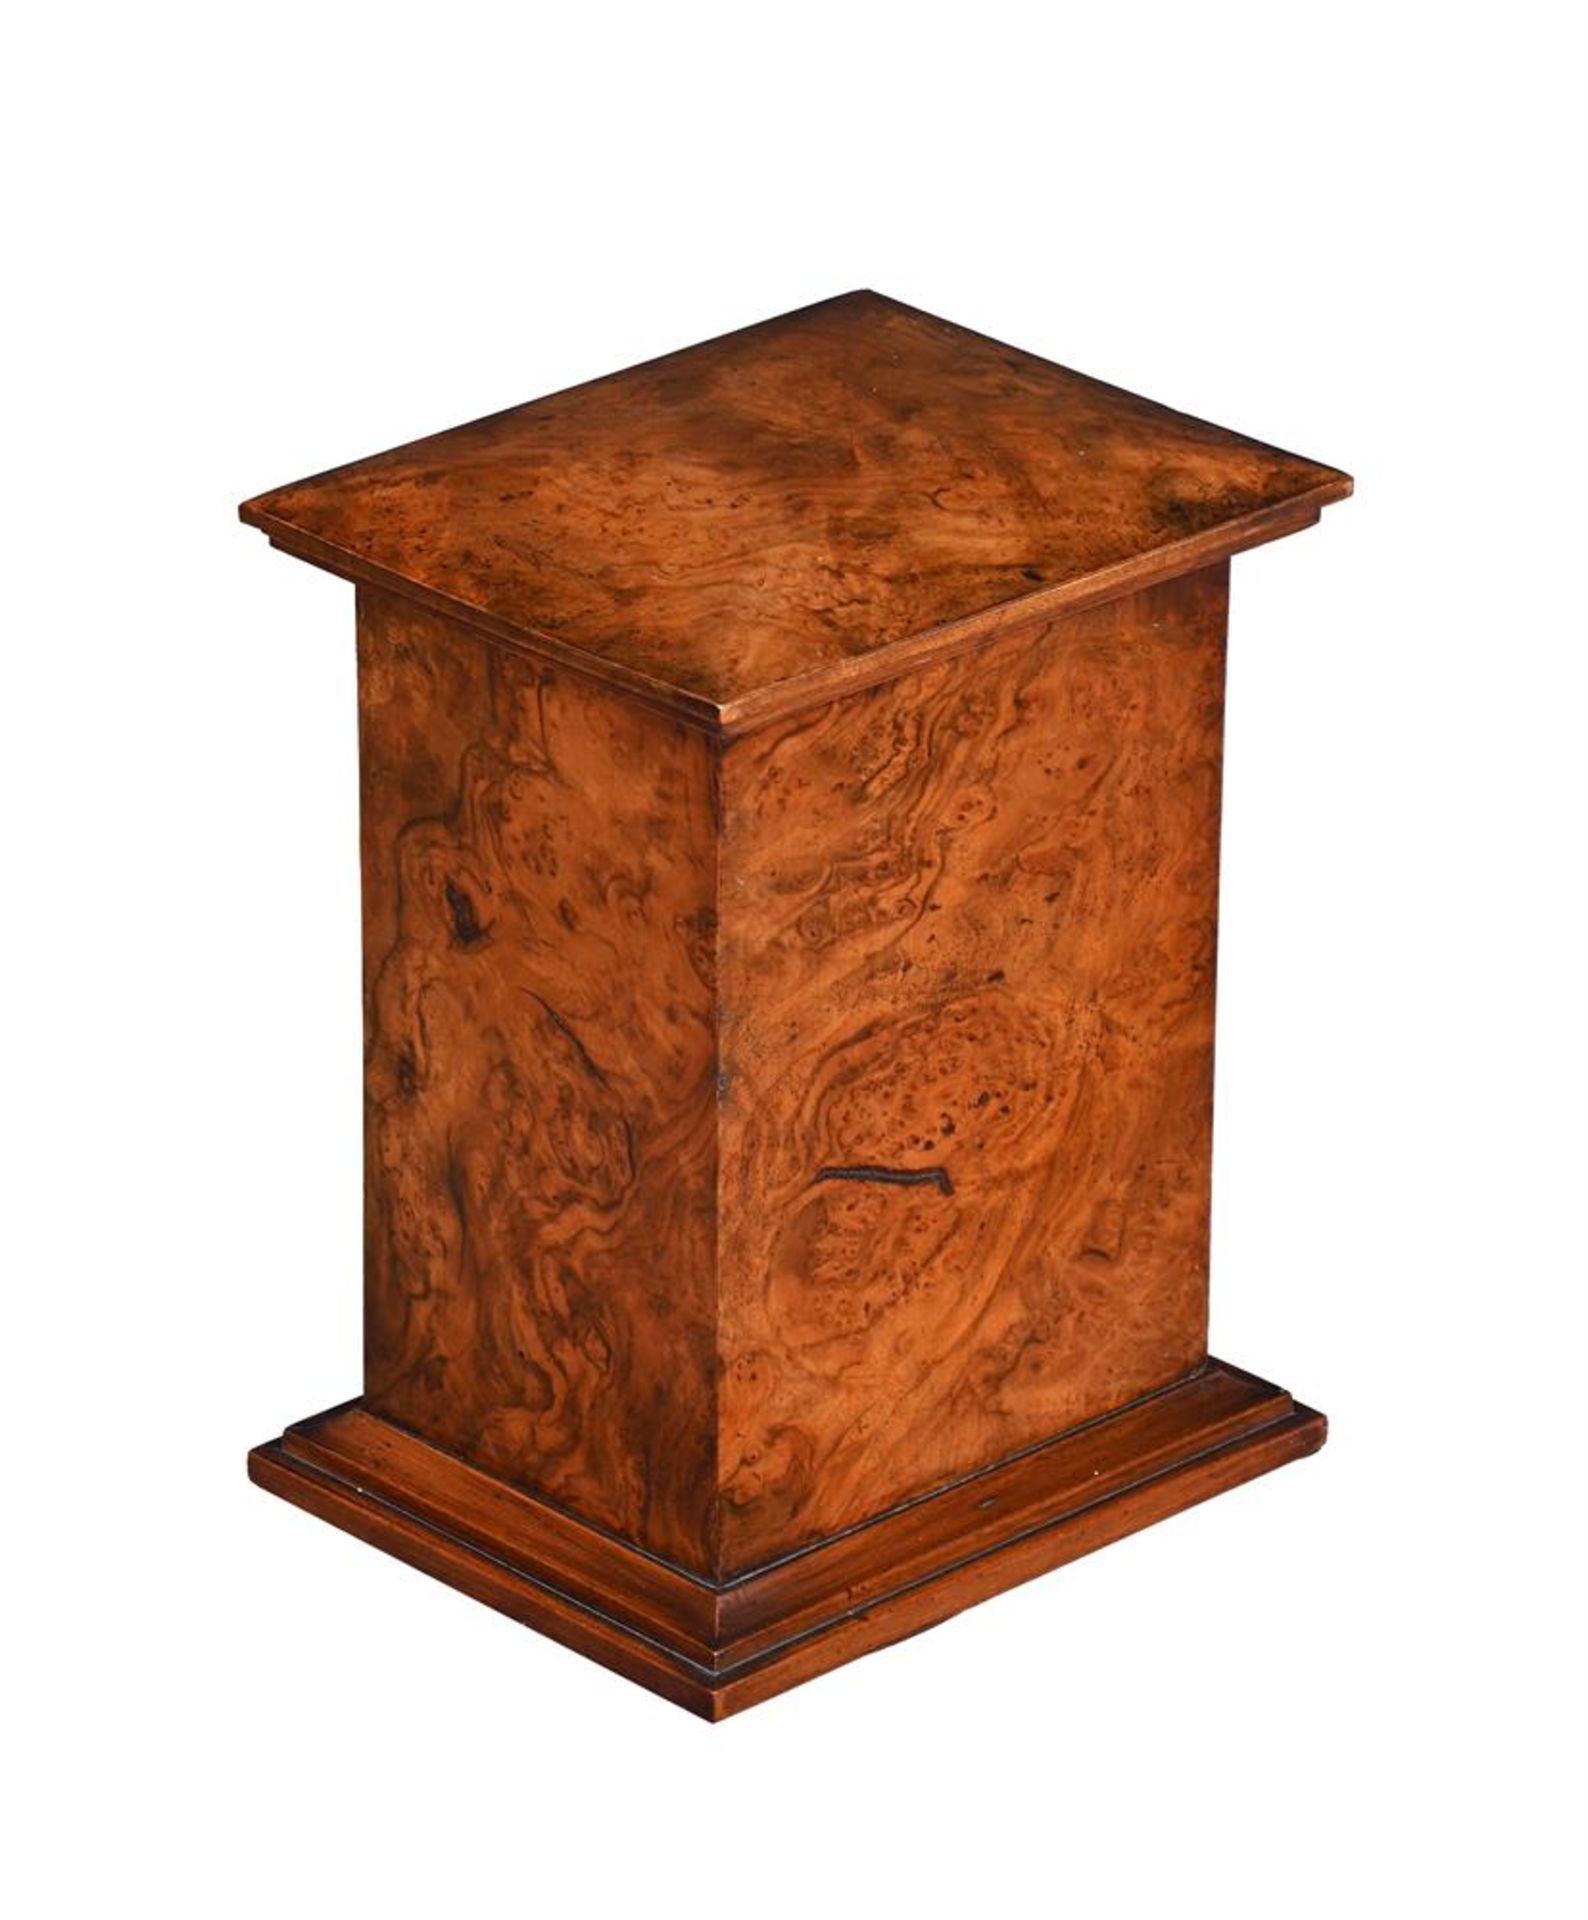 AN EDWARDIAN FIGURED WALNUT TABLE LETTER BOX, EARLY 20TH CENTURY - Image 3 of 3